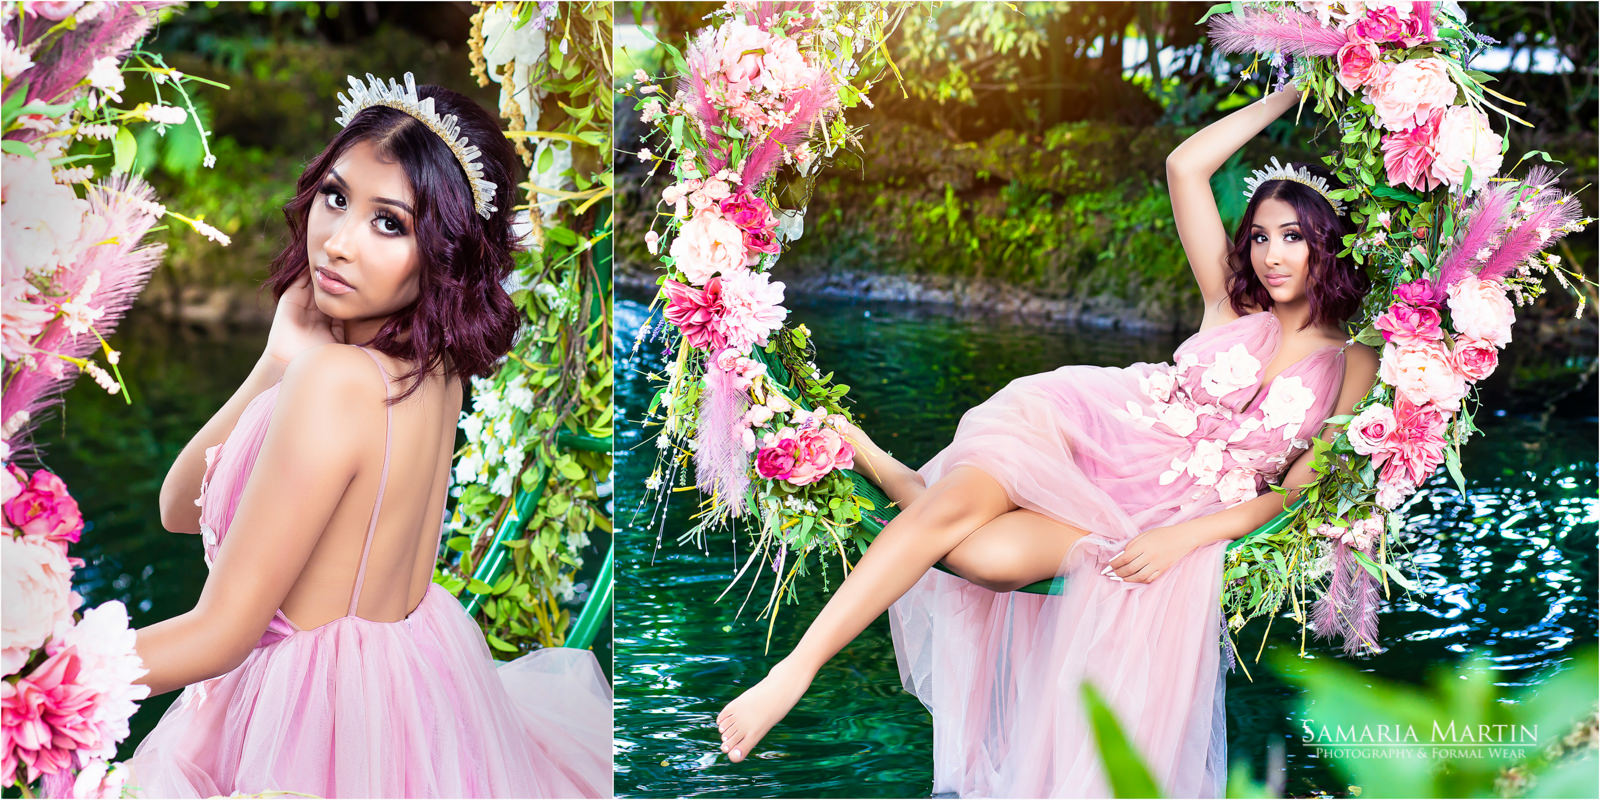 Quinceaneras dresses 2021, quinceanera with flowers photoshoot, best quinceaneras pictures, best photographer in Miami, Samaria Martin Photographer 2